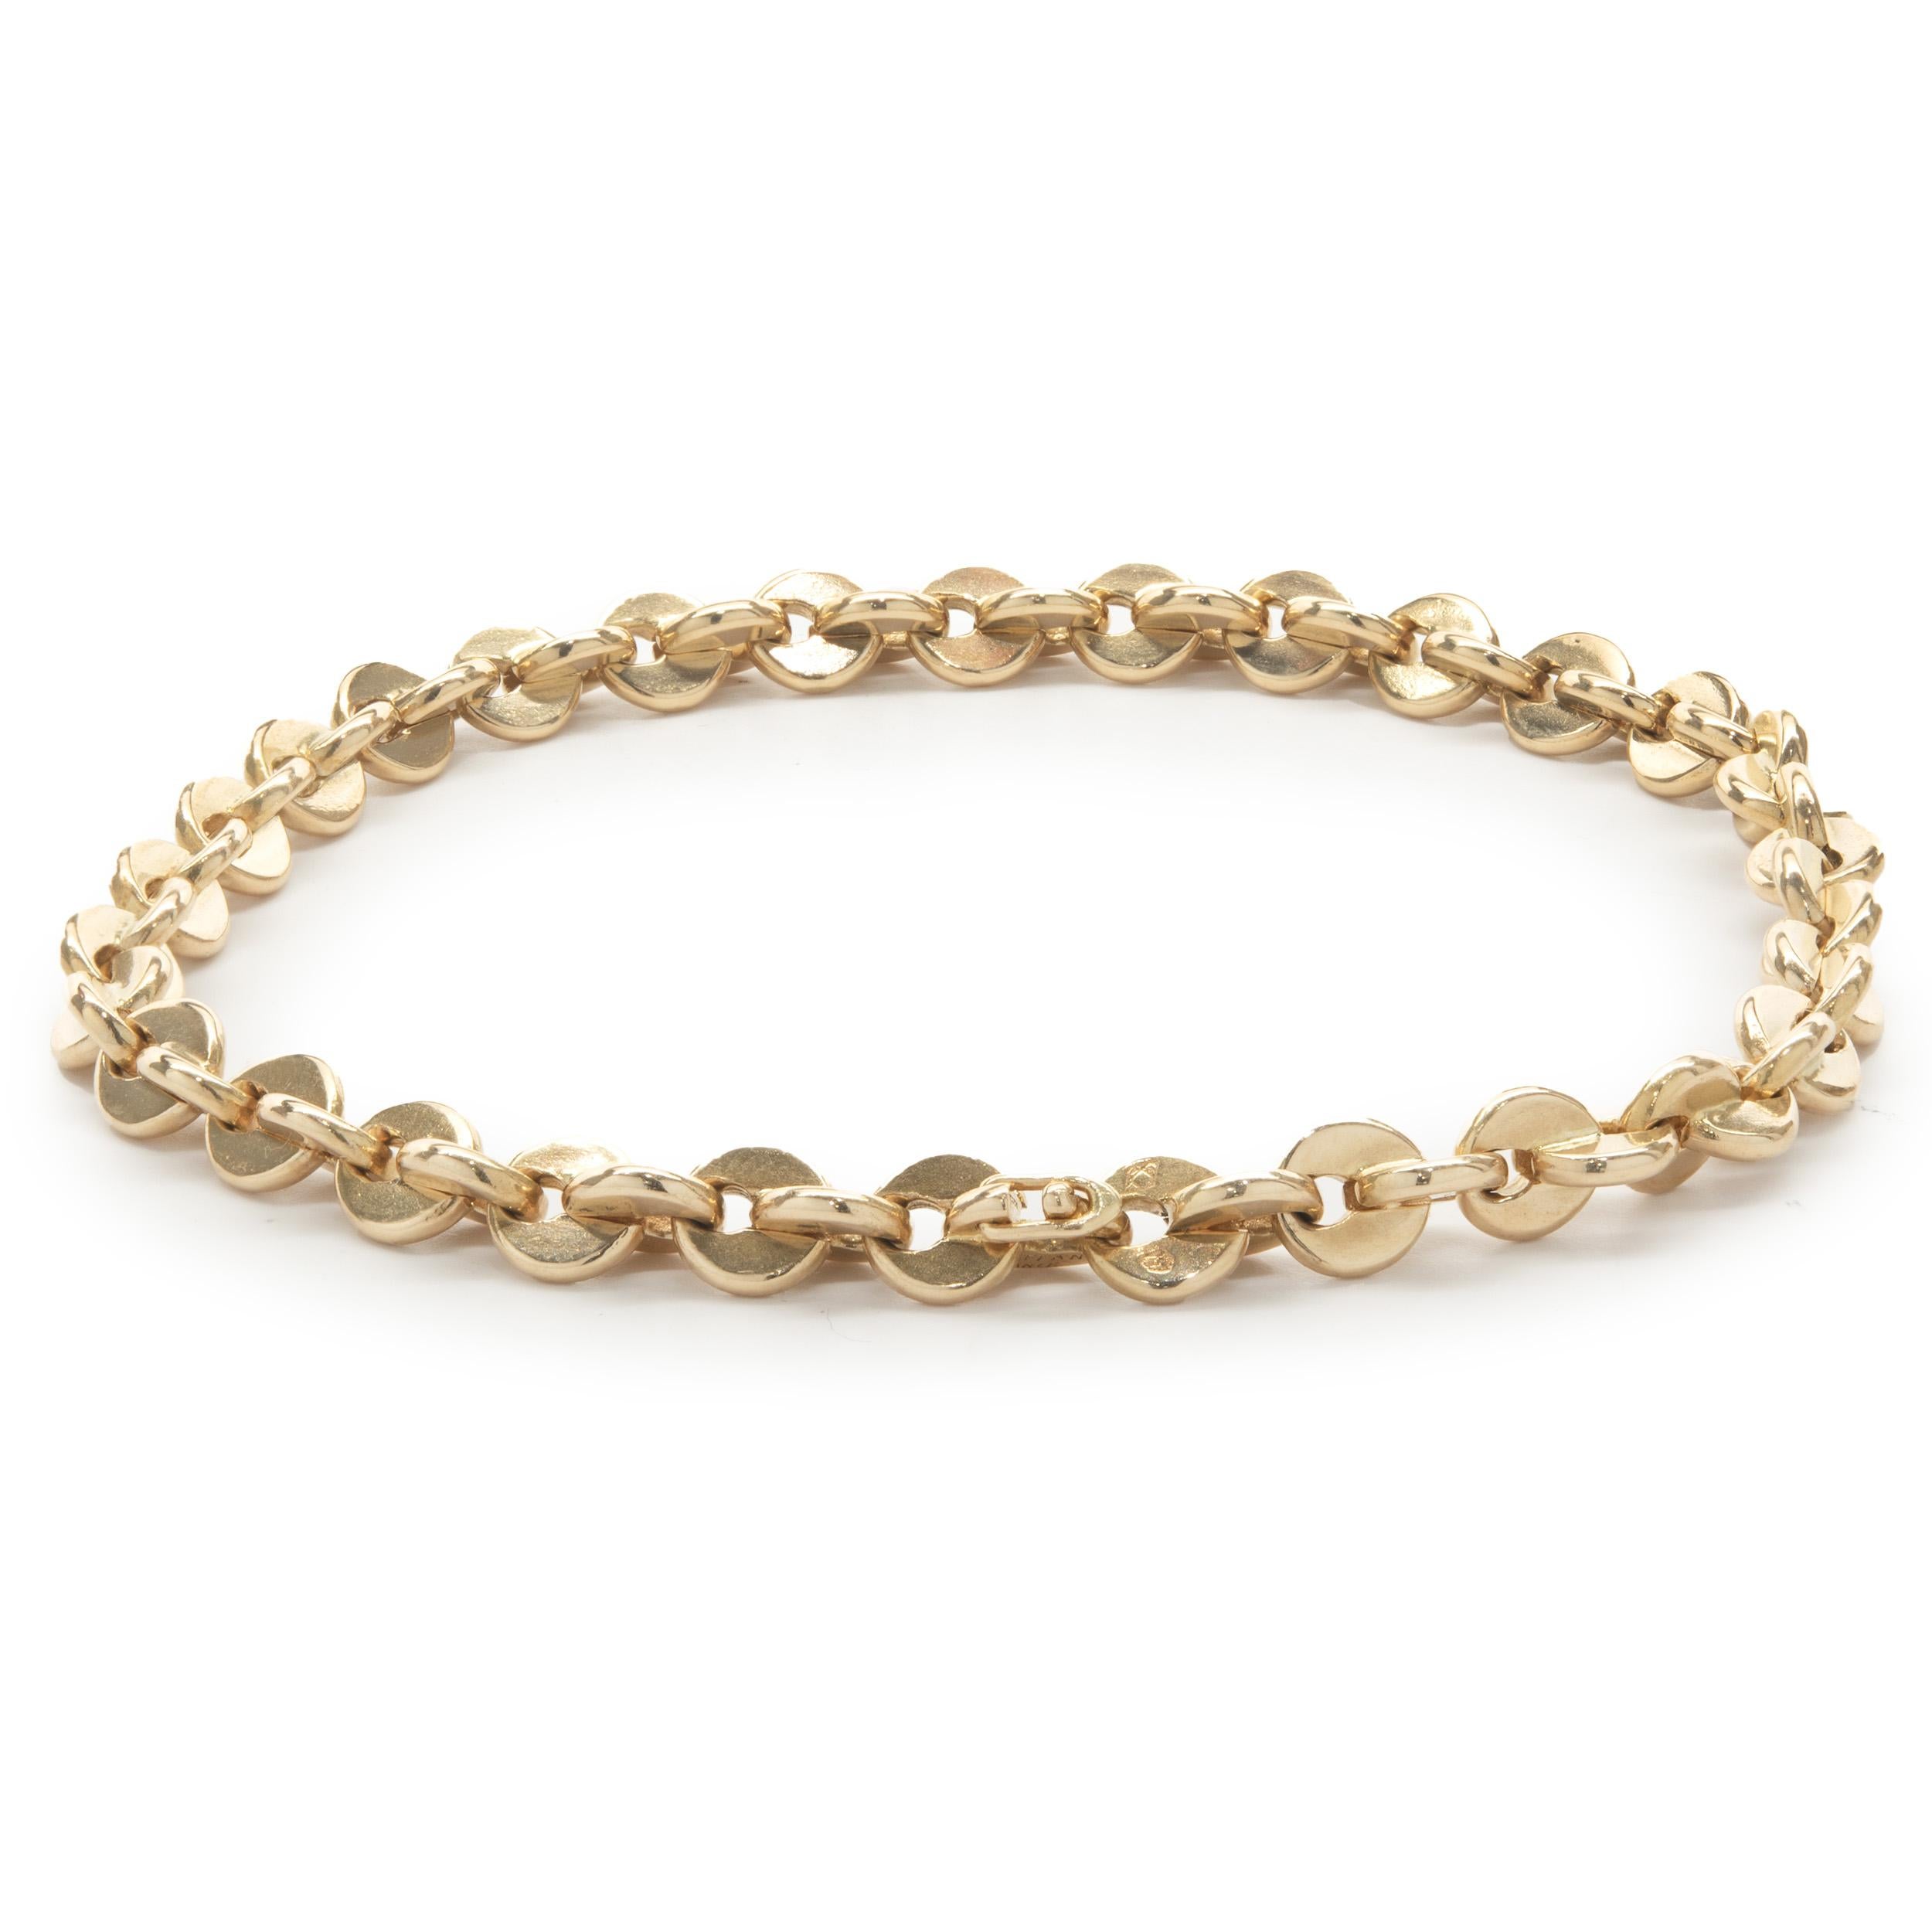 Designer: Tiffany & Co. 
Material: 18K yellow gold
Dimensions: bracelet measures 7.75-inches
Weight: 21.45 grams